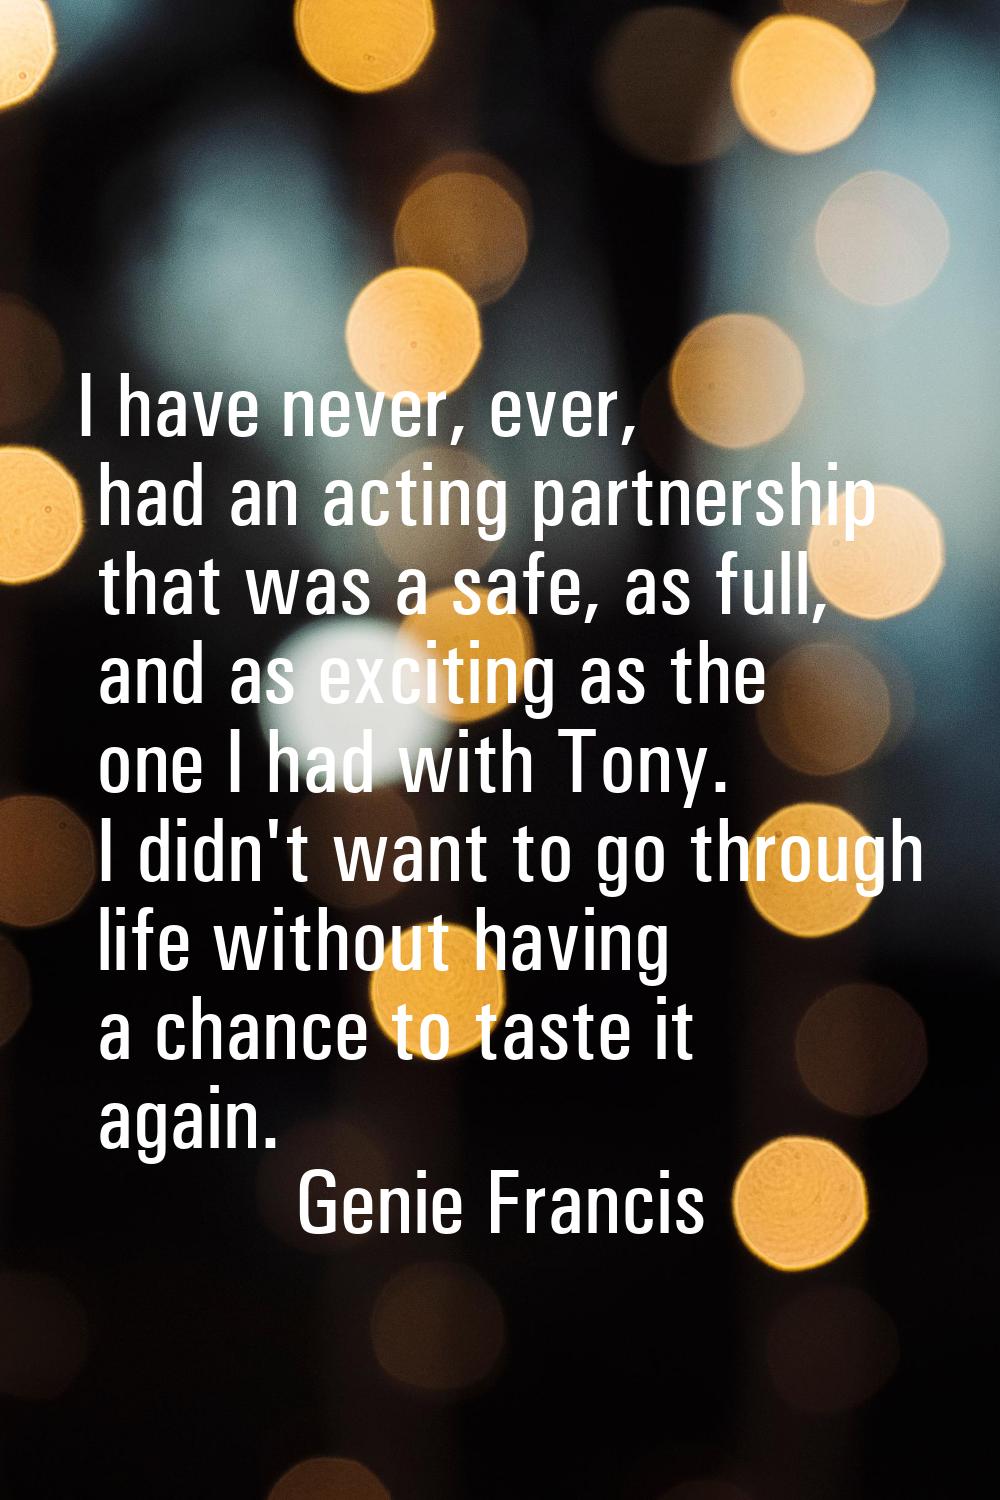 I have never, ever, had an acting partnership that was a safe, as full, and as exciting as the one 